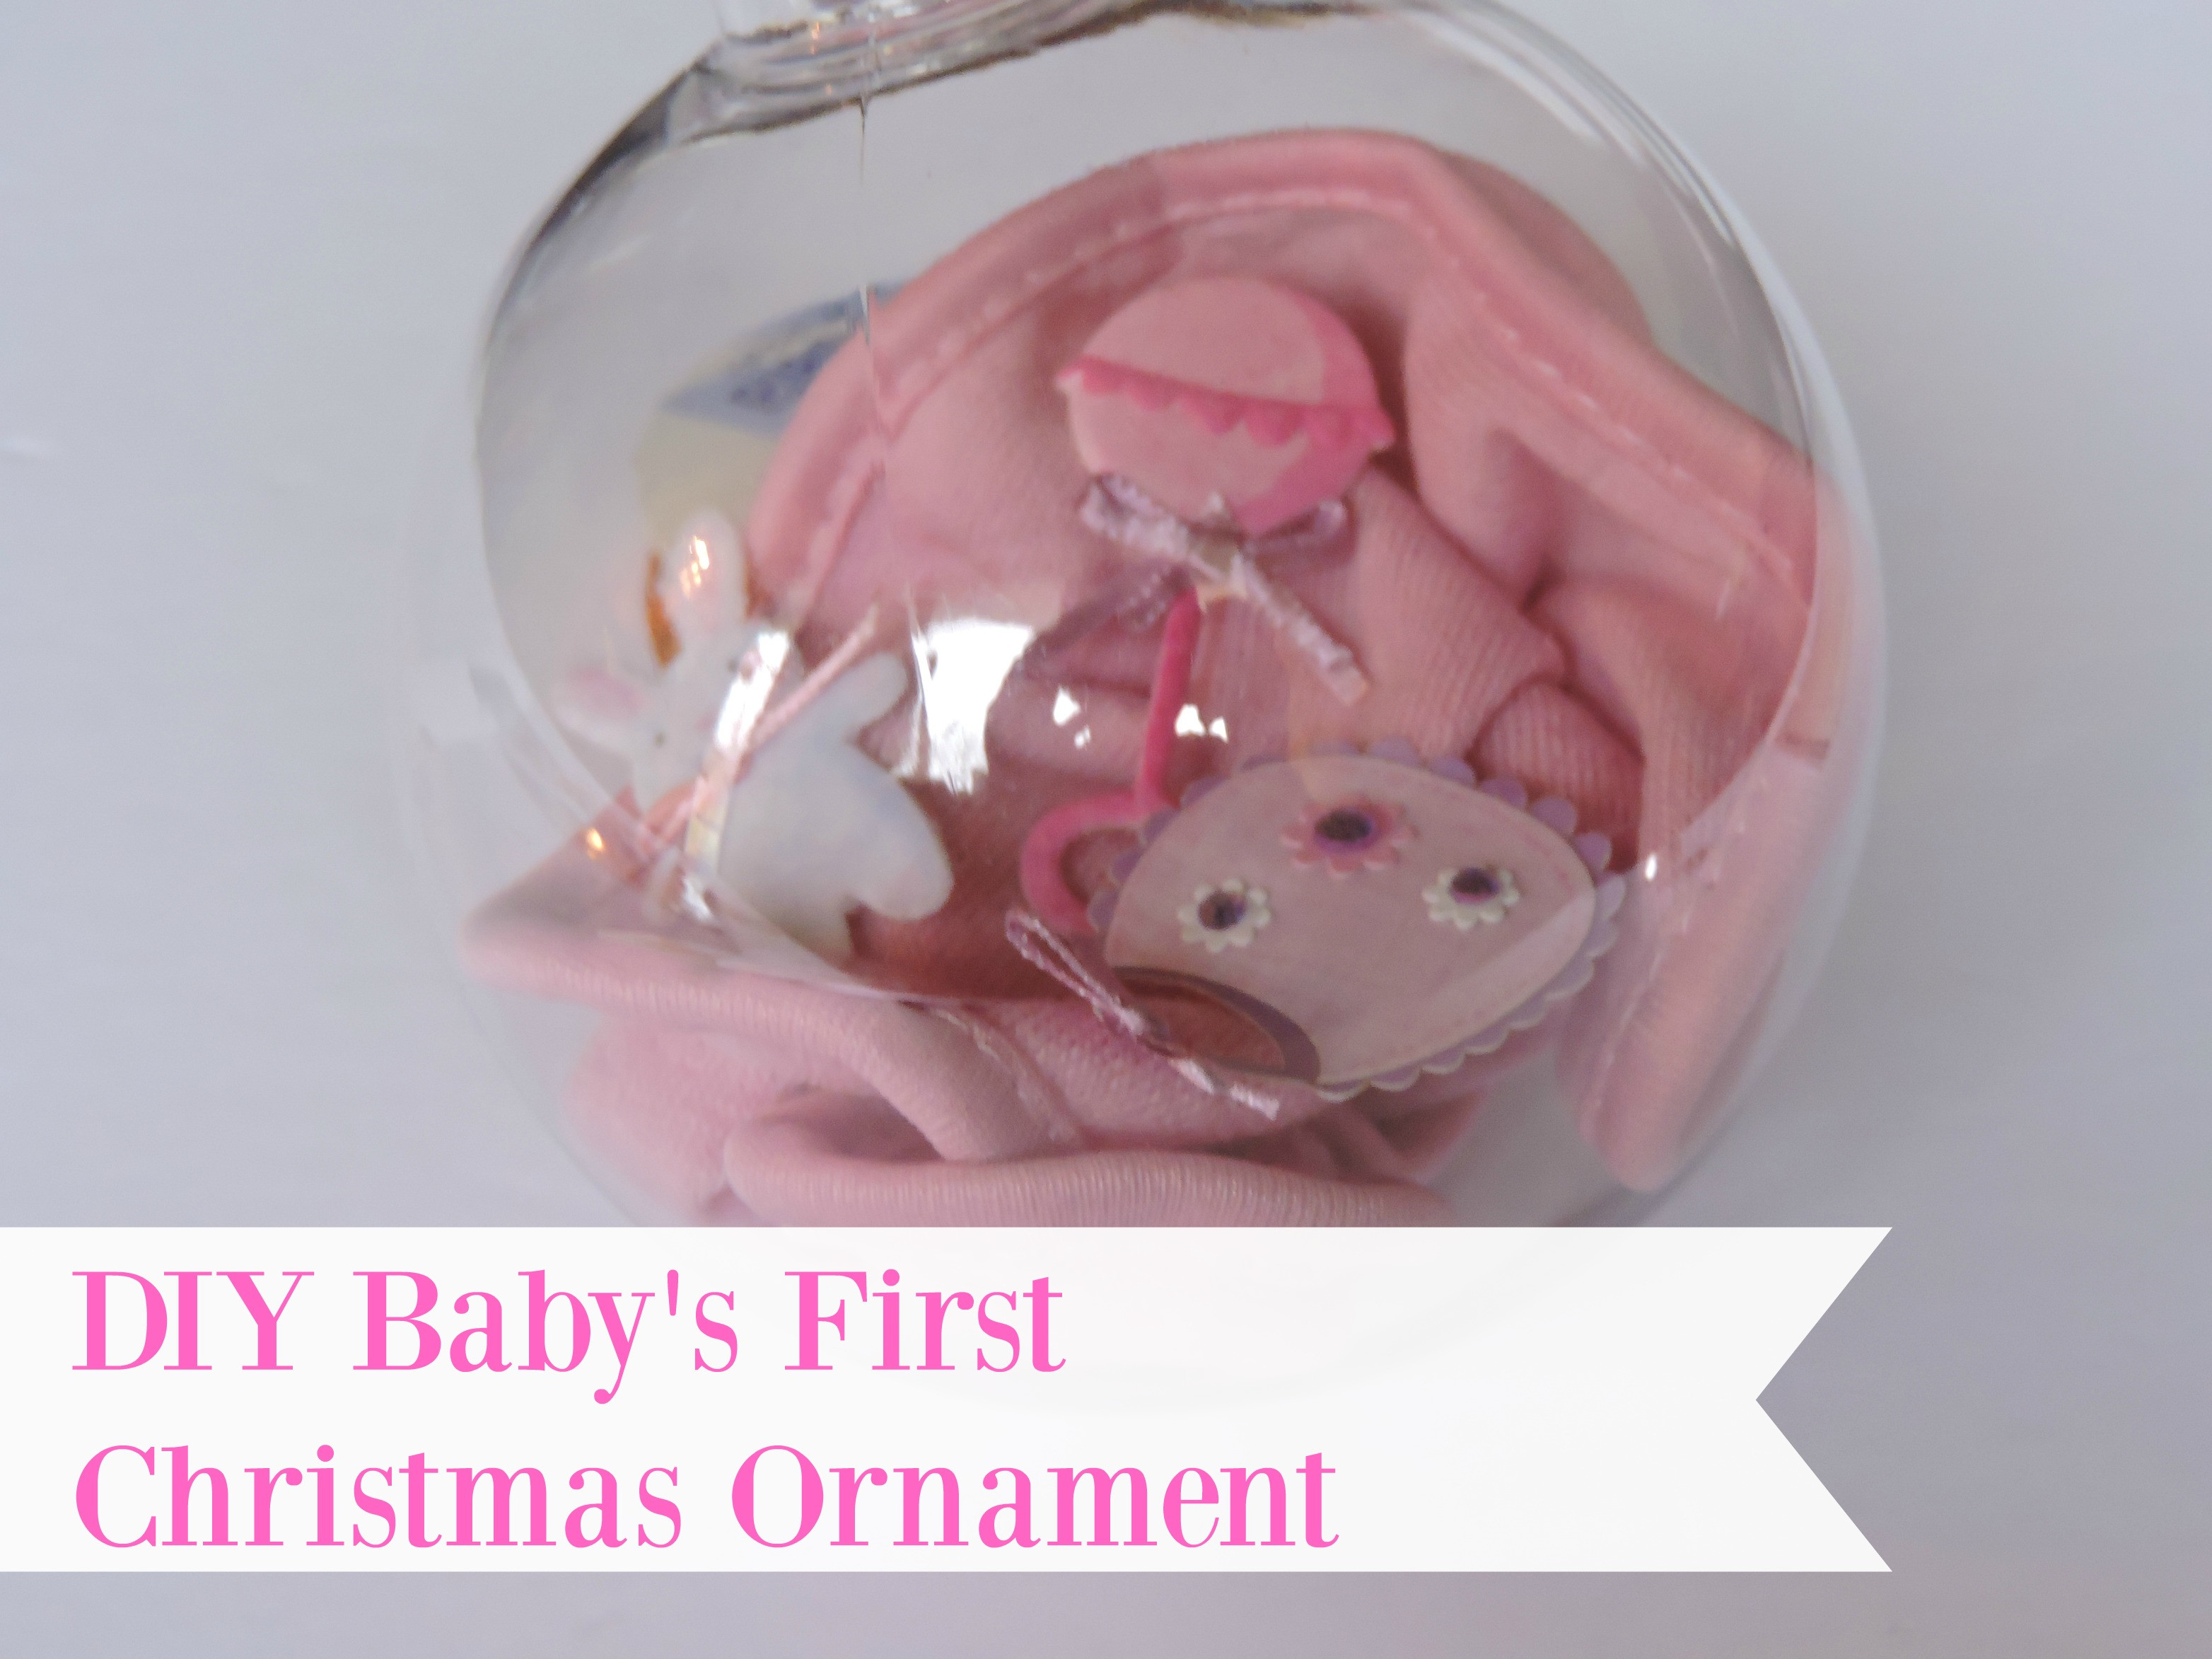 DIY Baby First Christmas Ornament
 DIY Baby s First Christmas Ornament